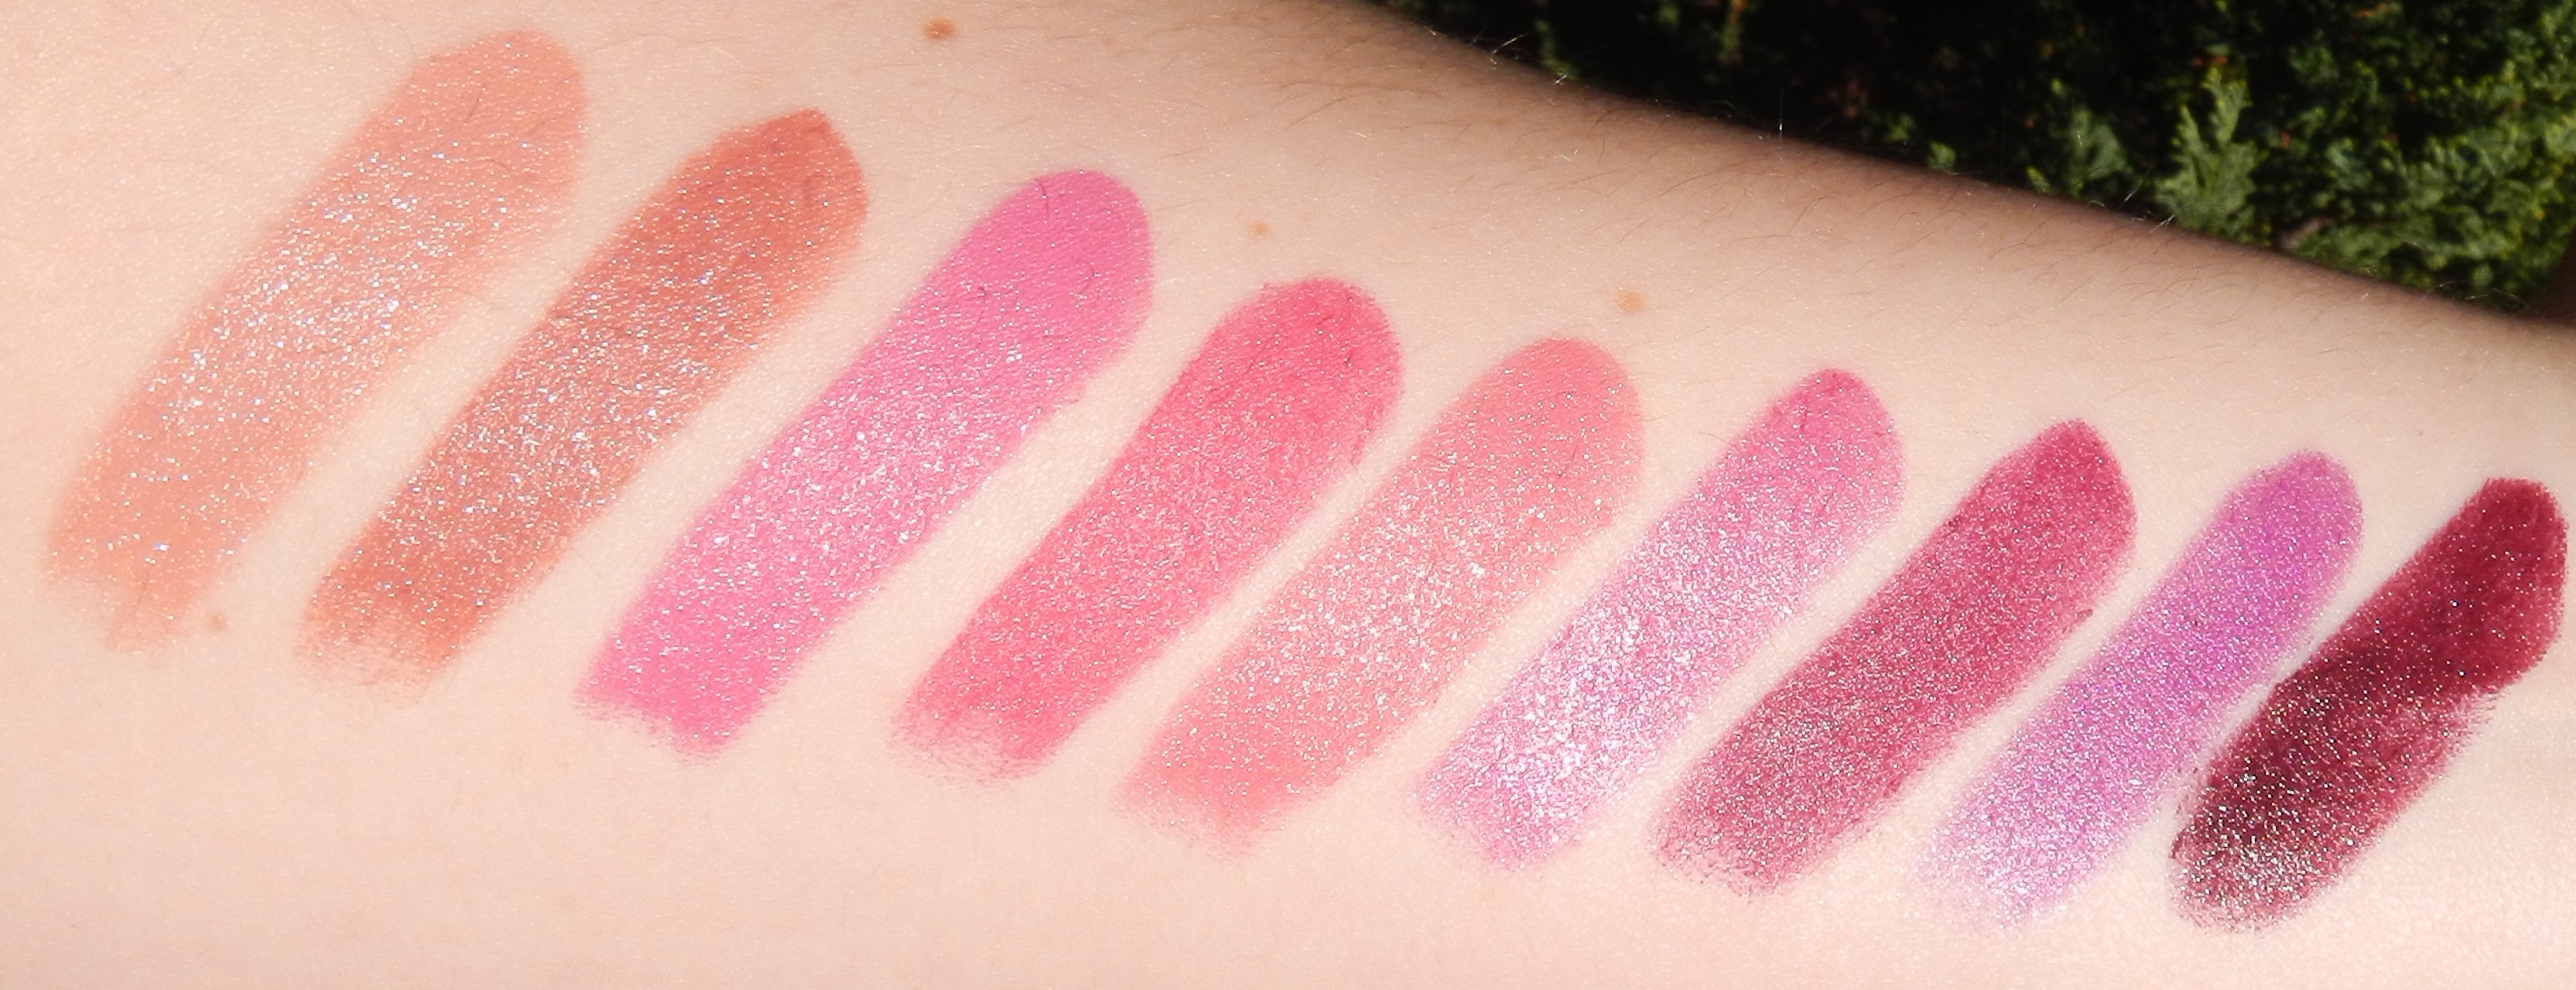 Swatches from left to right - Nude Crème, Naturally Chic, Rose Amour, Hot P...